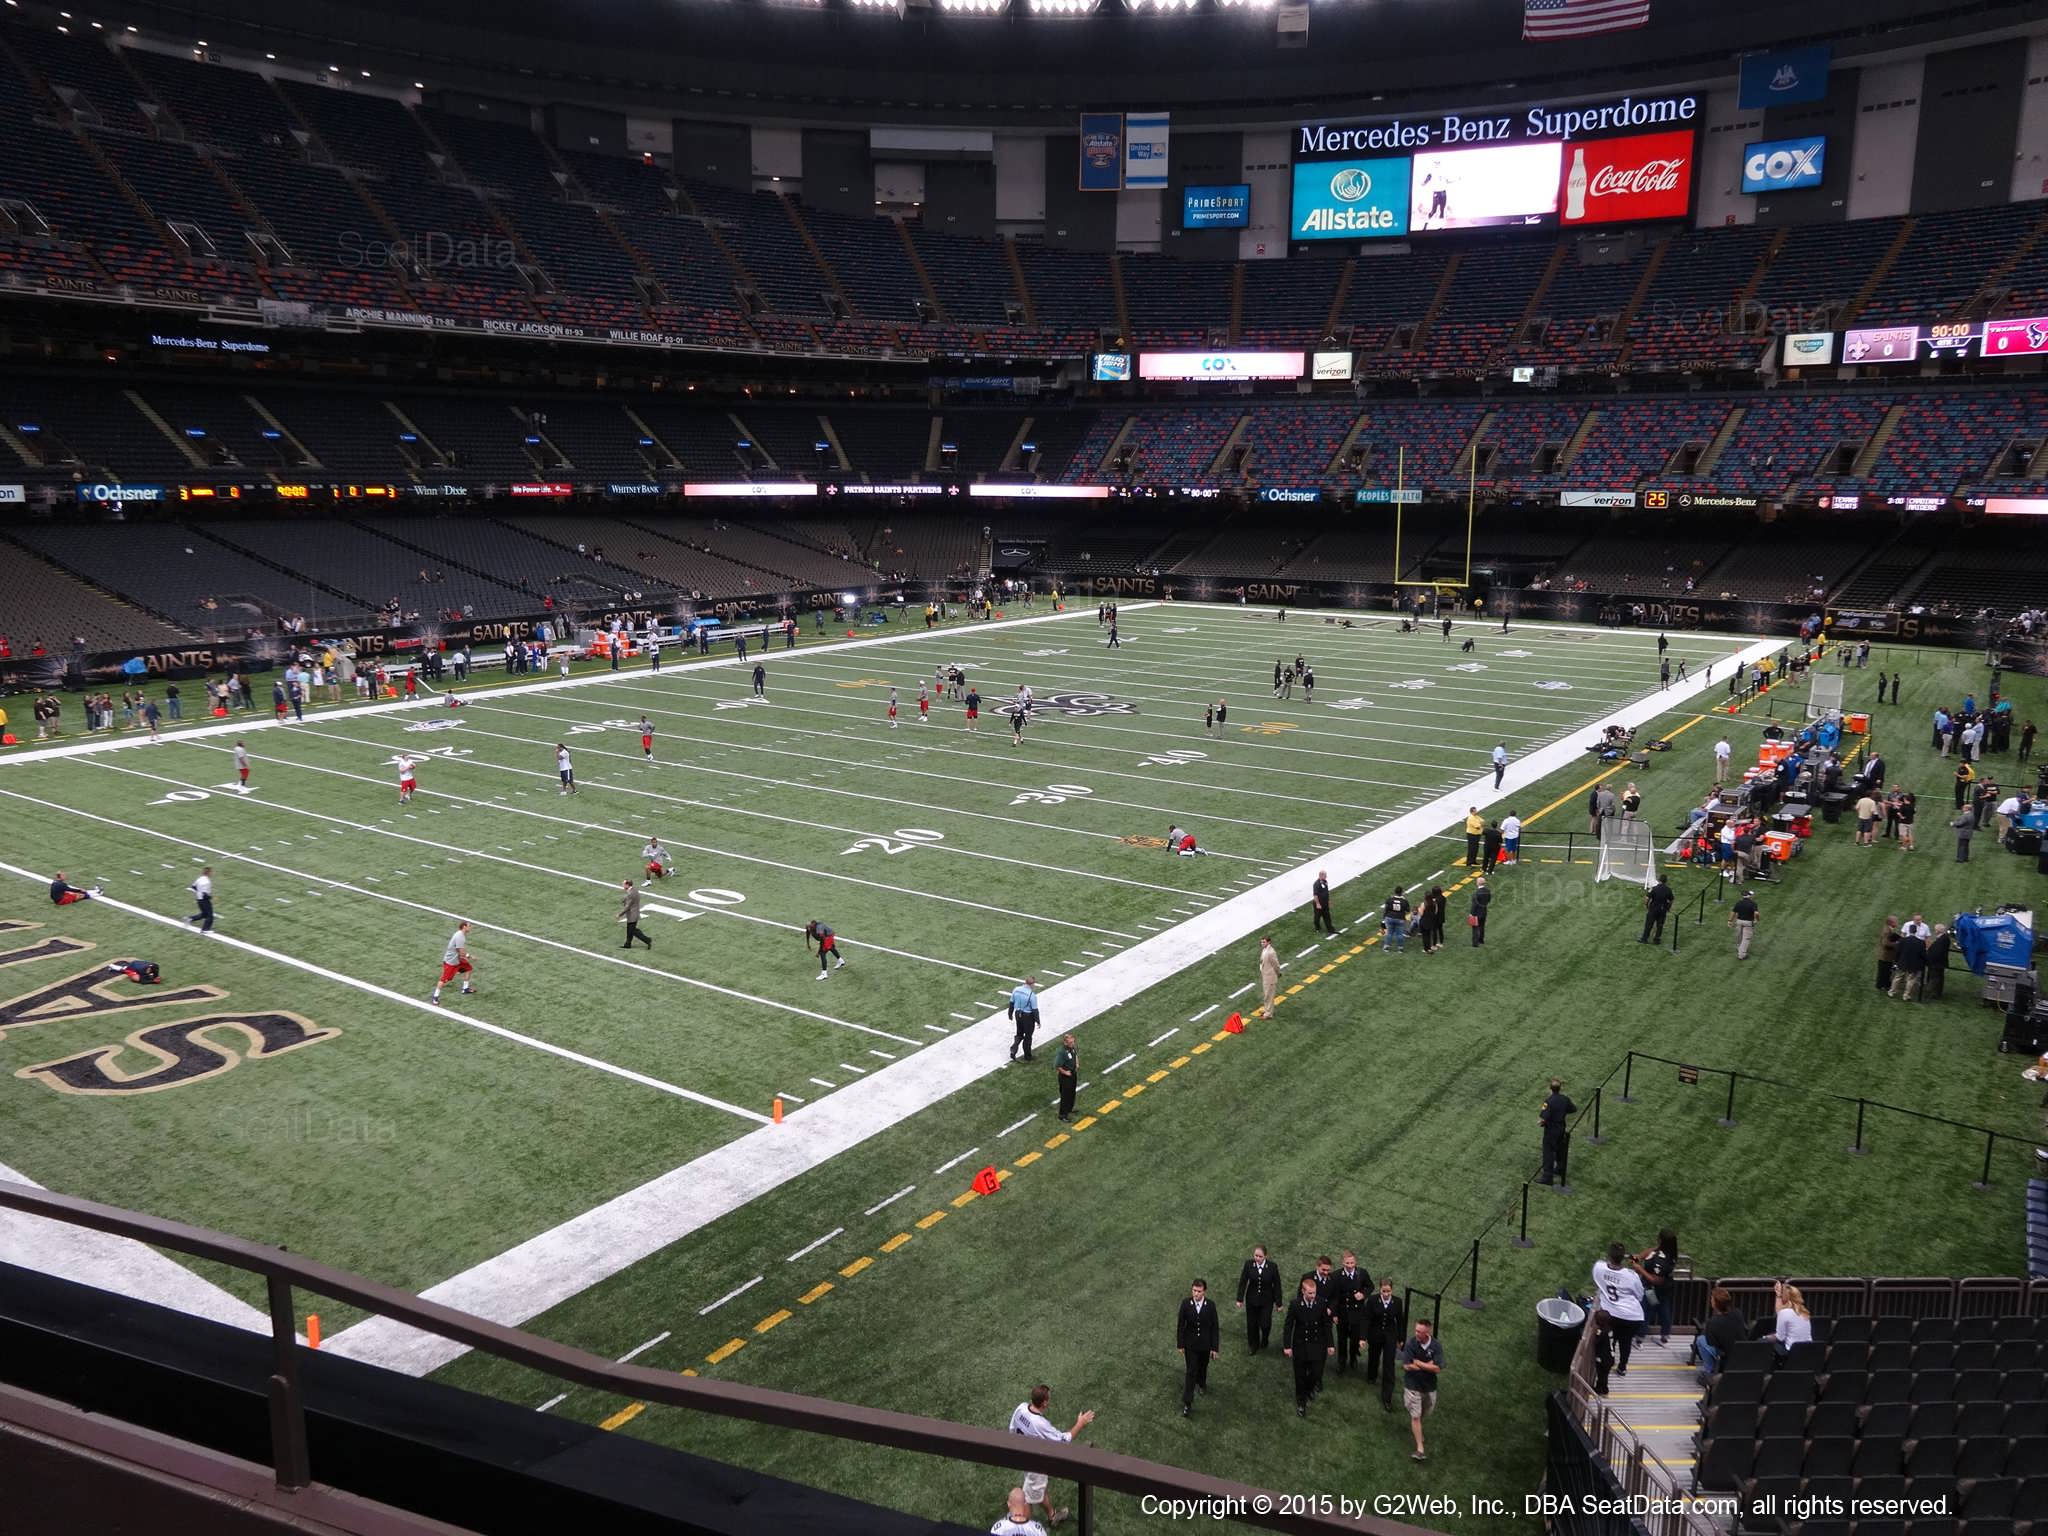 Seat view from section 277 at the Mercedes-Benz Superdome, home of the New Orleans Saints